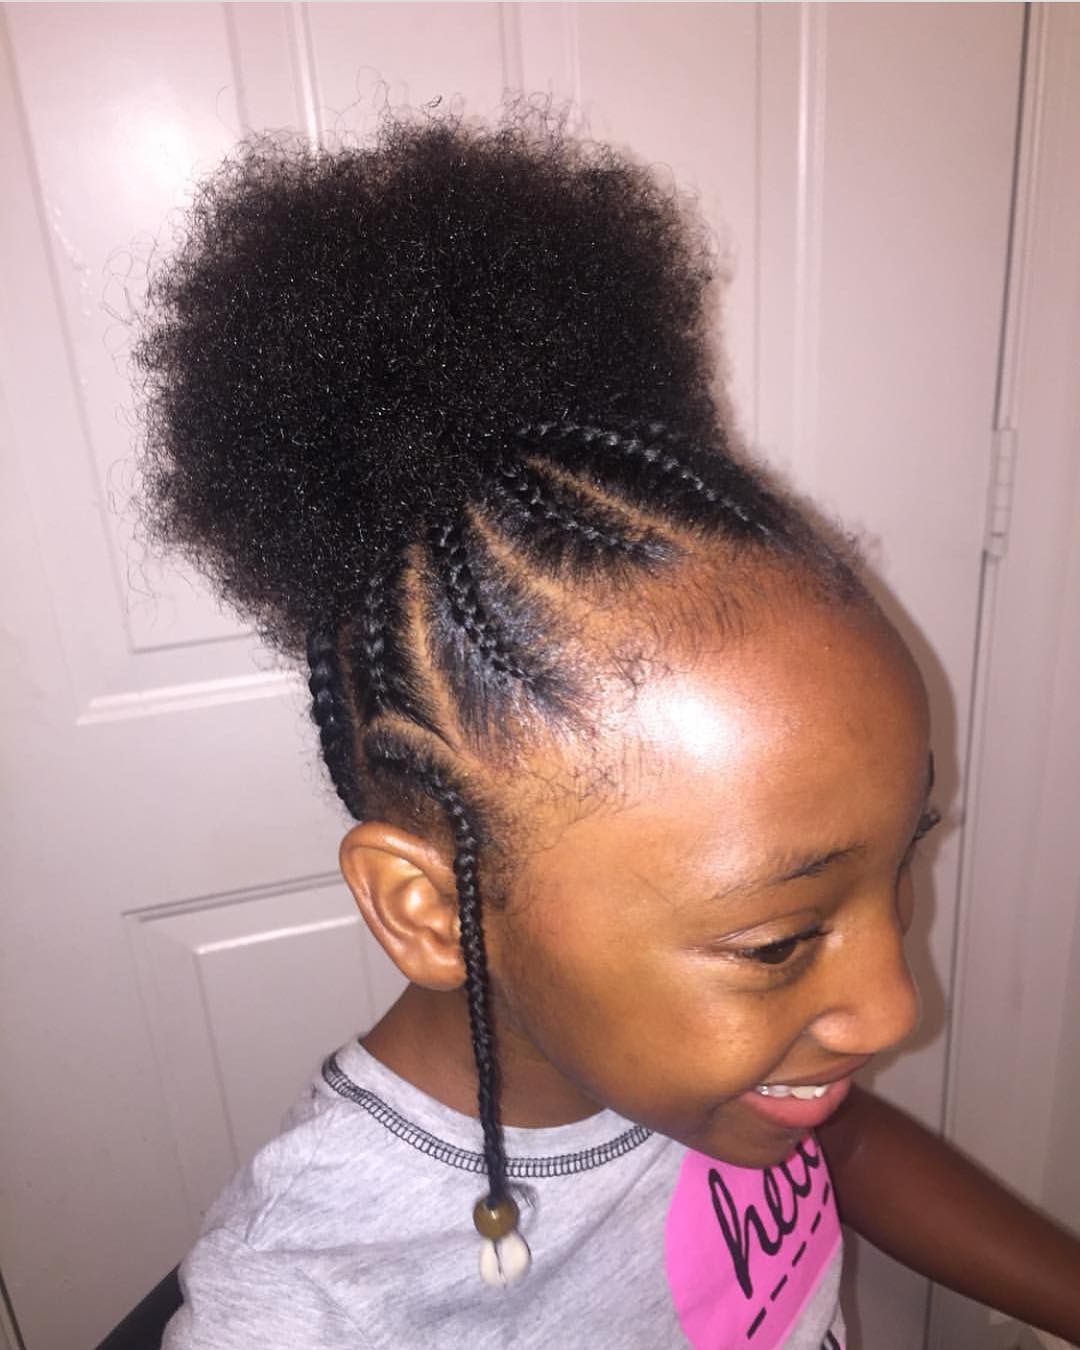 Creative braid updo styles for little black girls - Click042